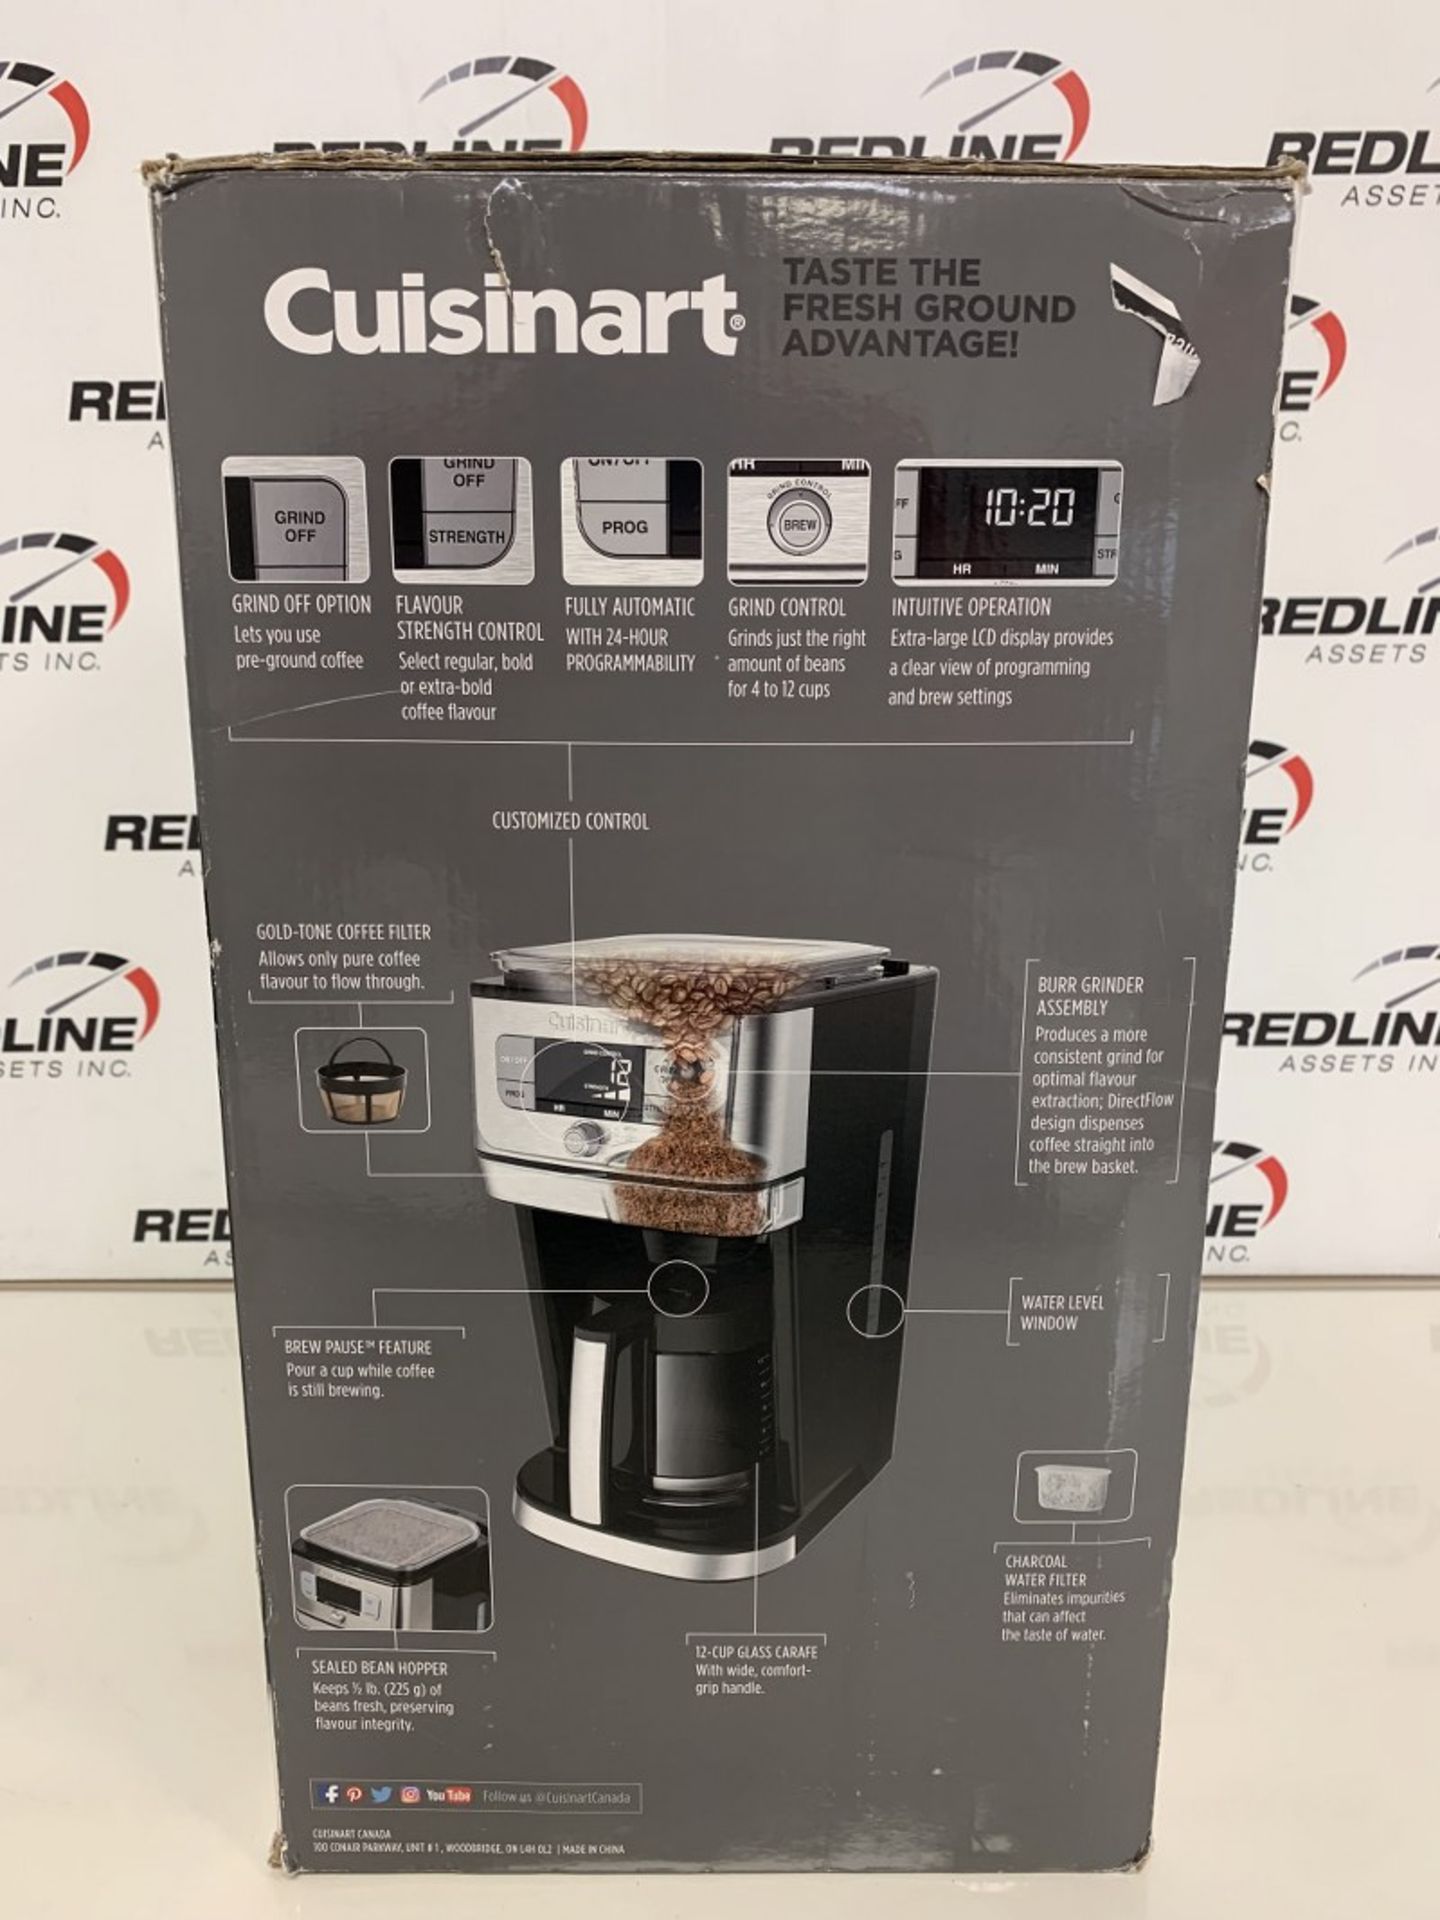 Cuisinart - Fully Automatic 12 Cup Coffee Maker - Image 2 of 2